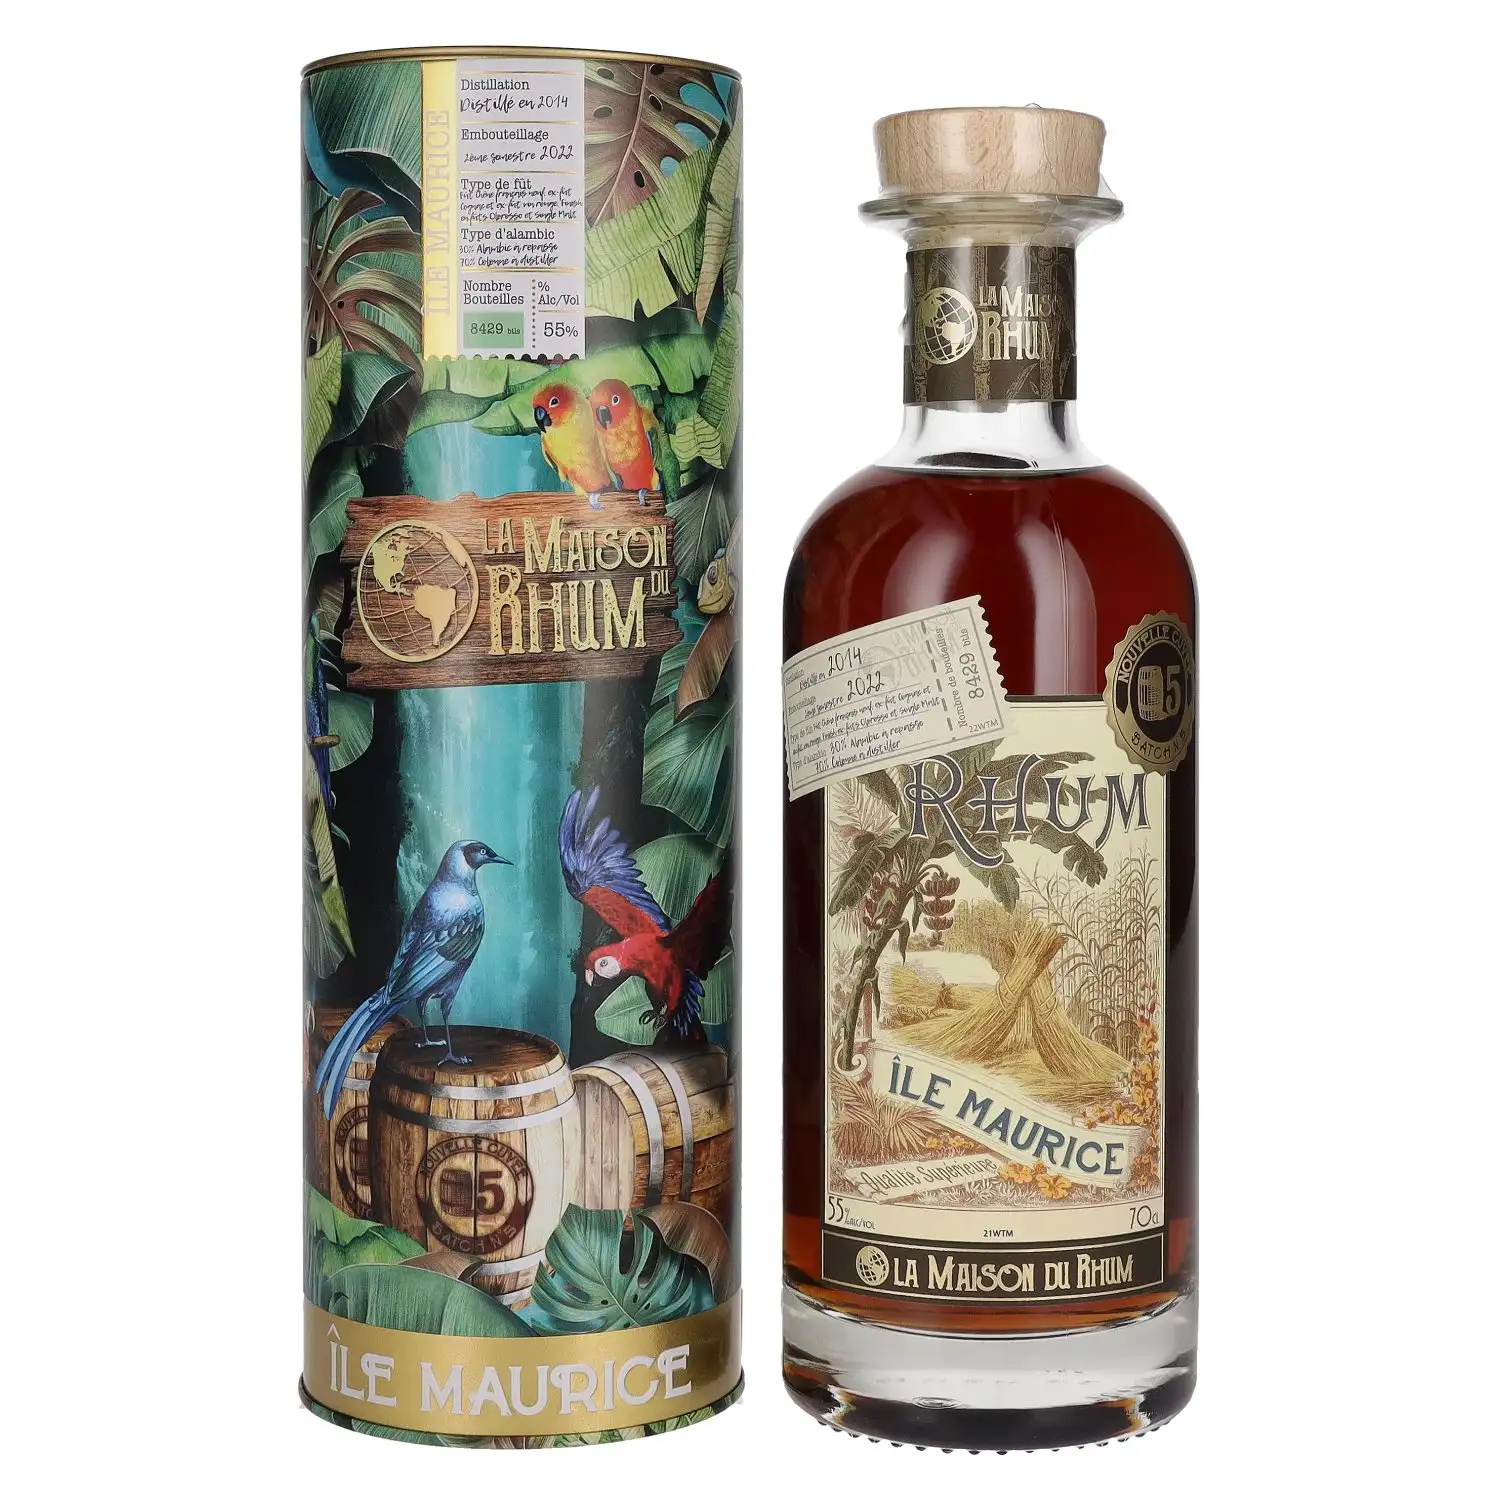 Image of the front of the bottle of the rum La Maison du Rhum Île Maurice